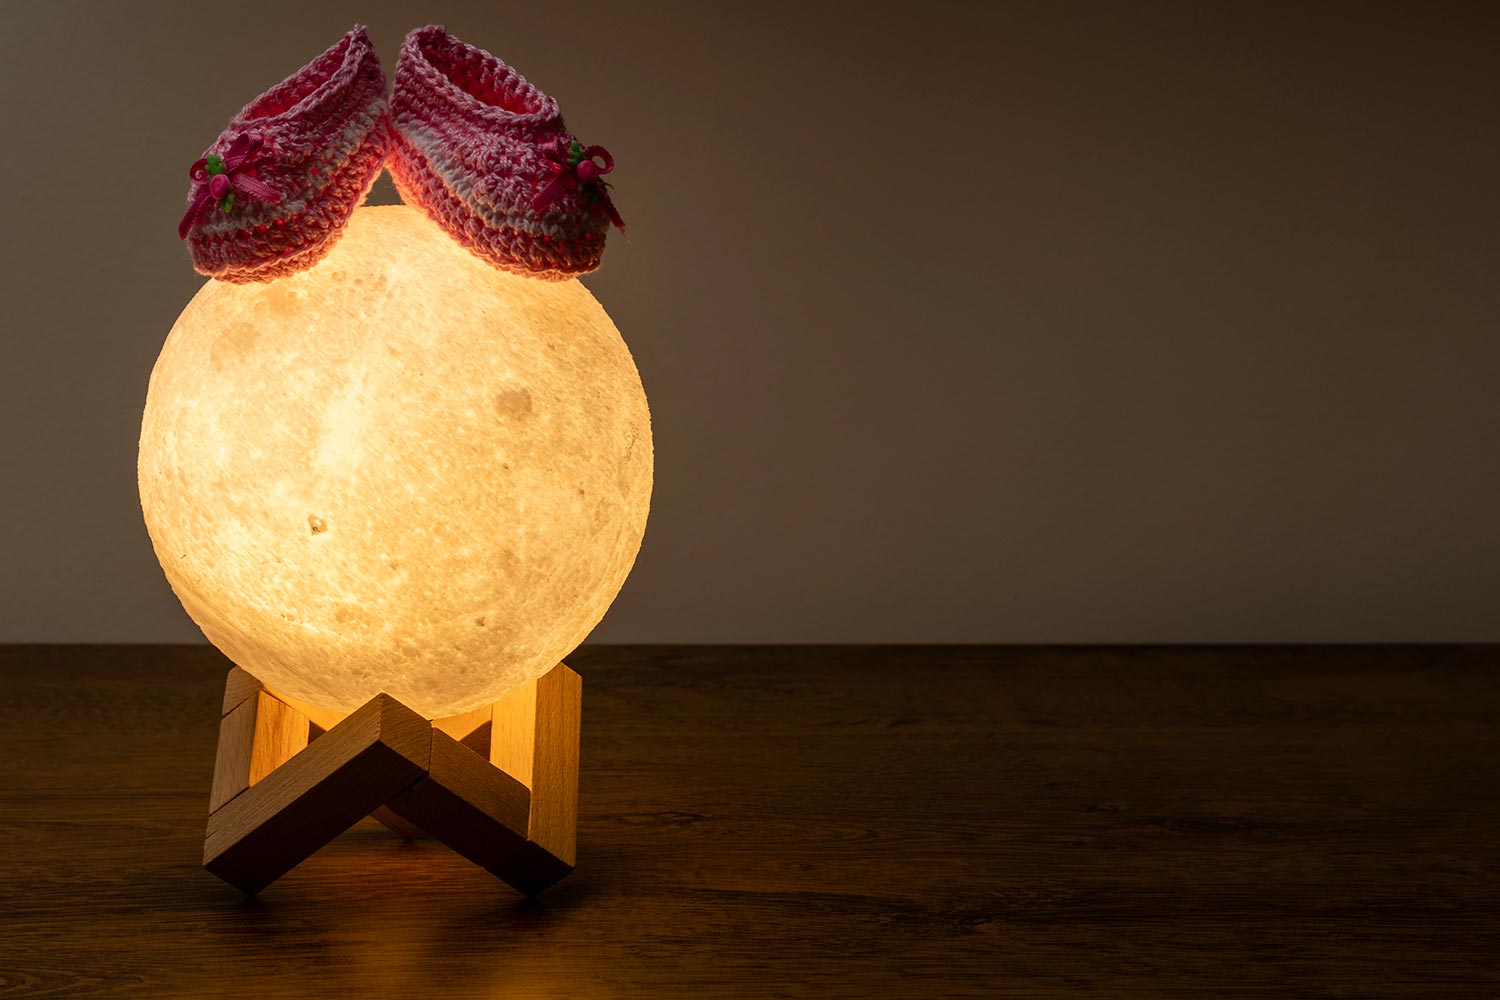 Moon lamp and baby slipper on wooden table